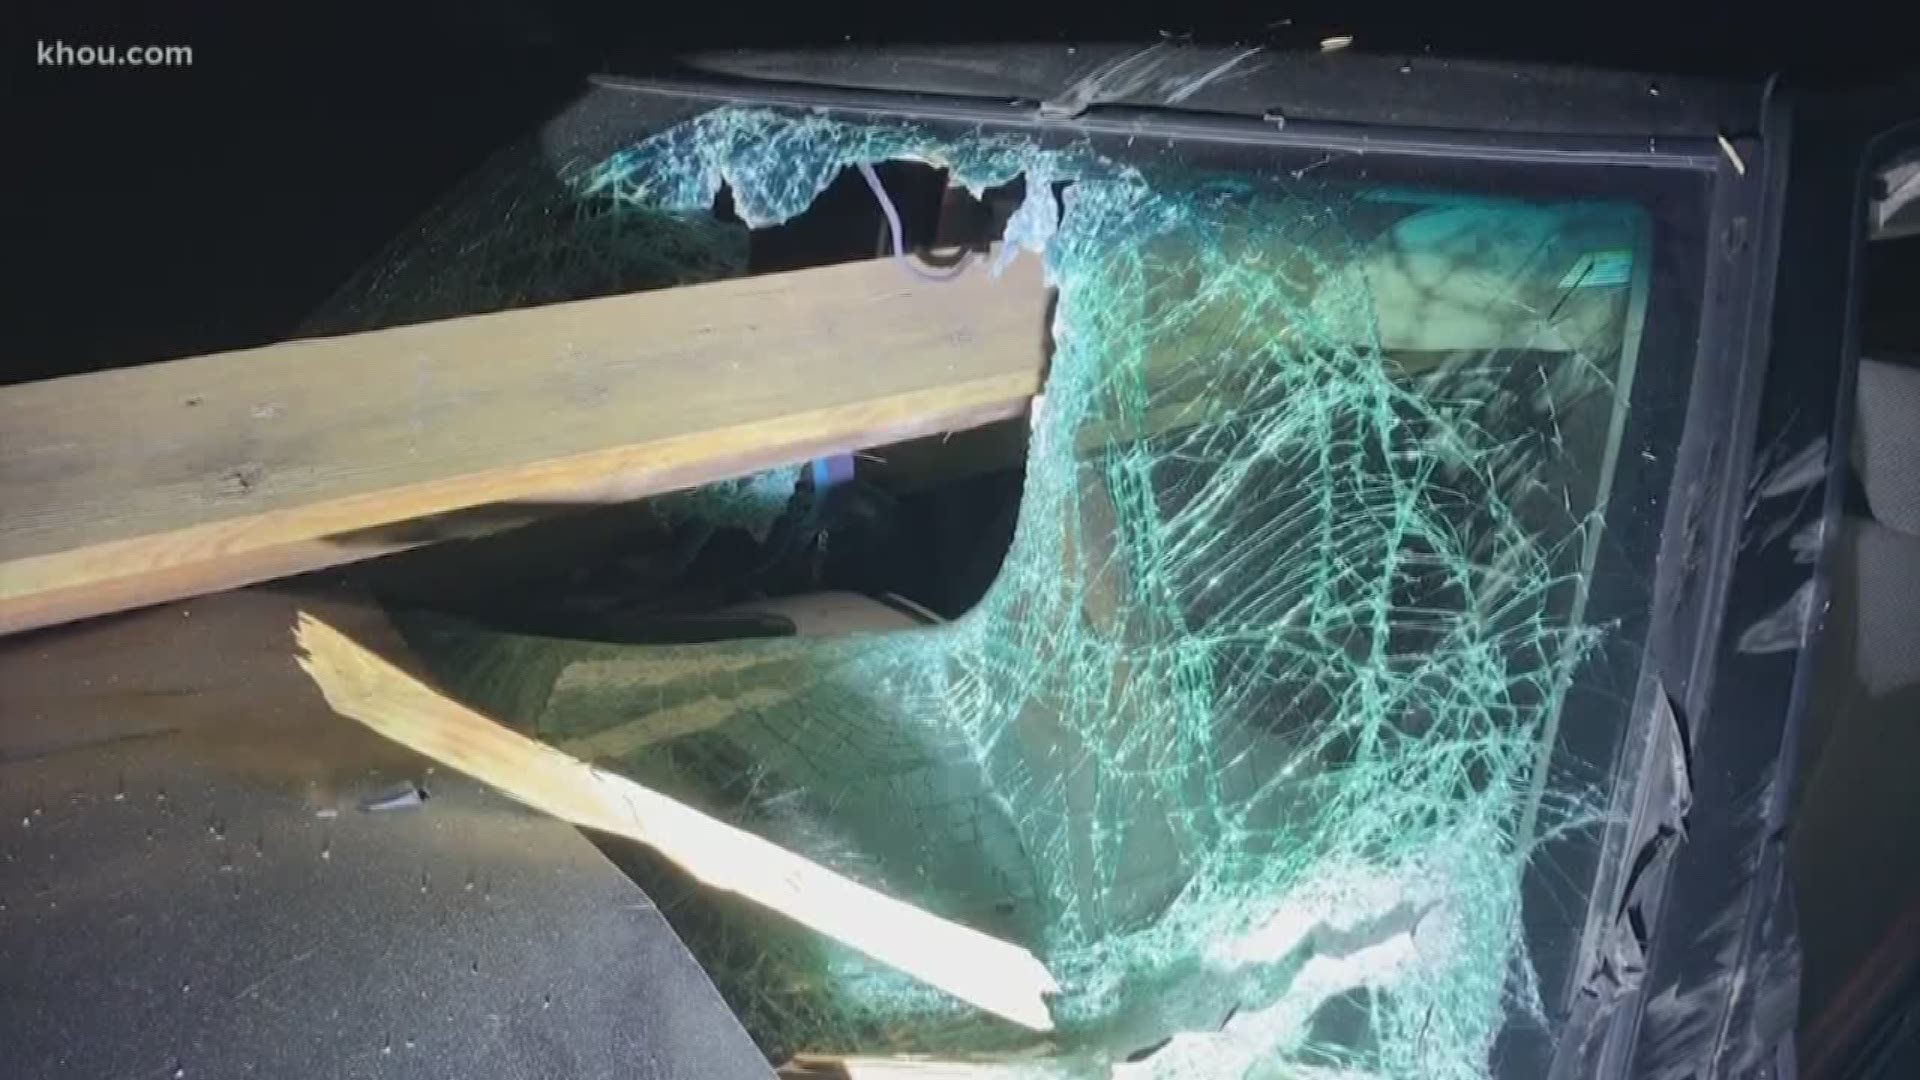 The crash happened Aug. 2, 2019 in the Conroe area - north of Houston. The driver not only survived 
 but also fled the scene.